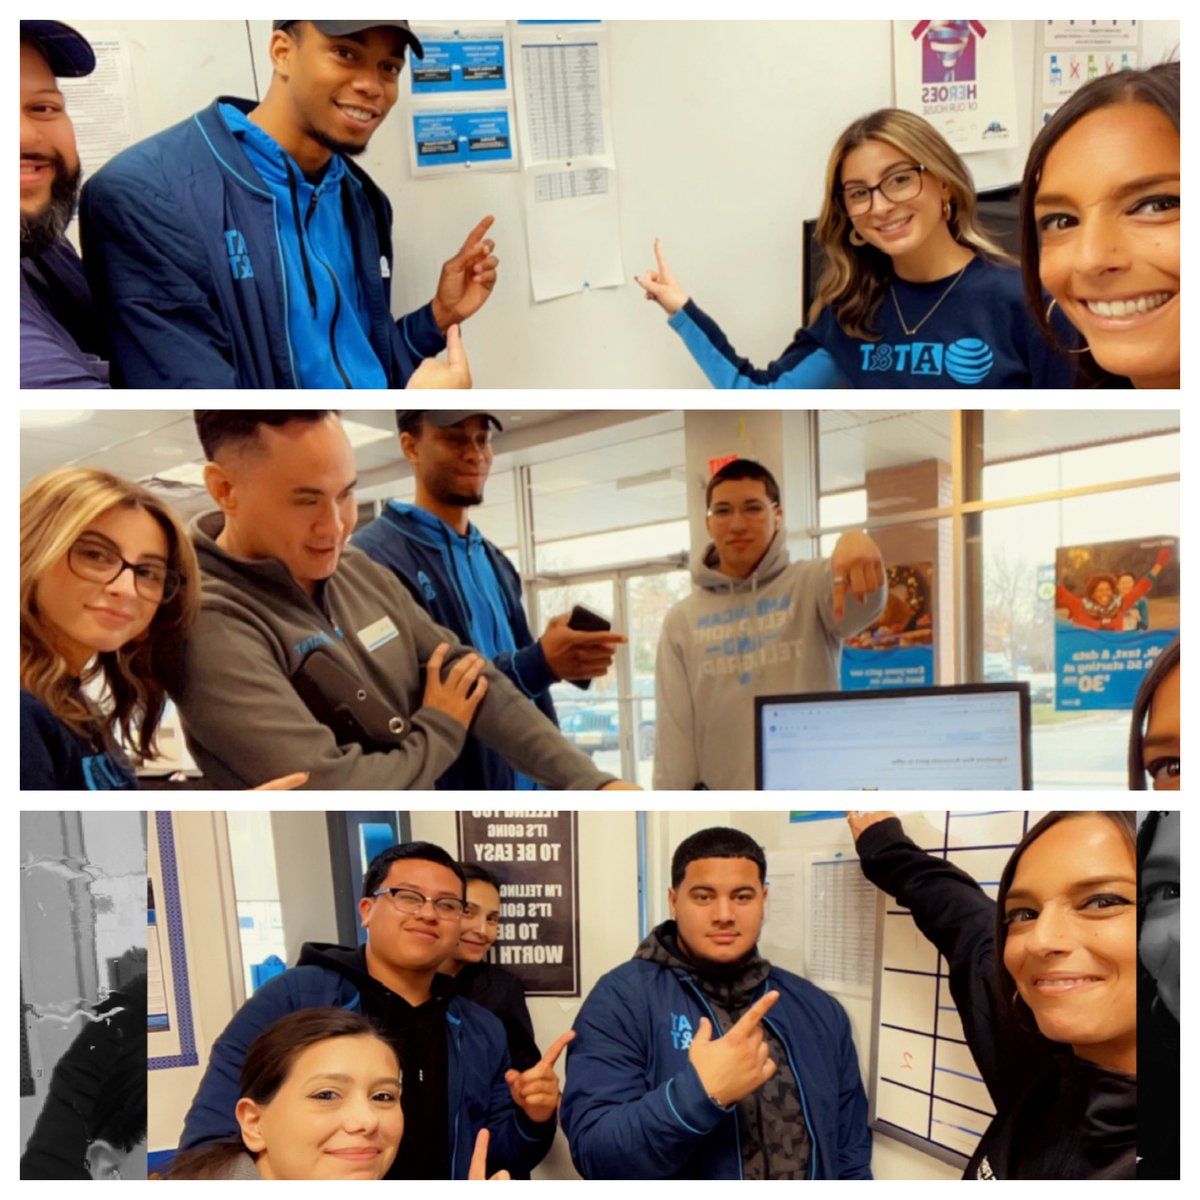 Great day with N9 SI Richmond Ave and Forest Ave making sure we are trained on the New Signature Key Account offers and driving growth inside the stores 💥💥🔥 @VitaliyZ17 @angels_candie @Vinecia_F #SignatureSizzlers #sERve1st @OneNYNJ #LifeAtATT